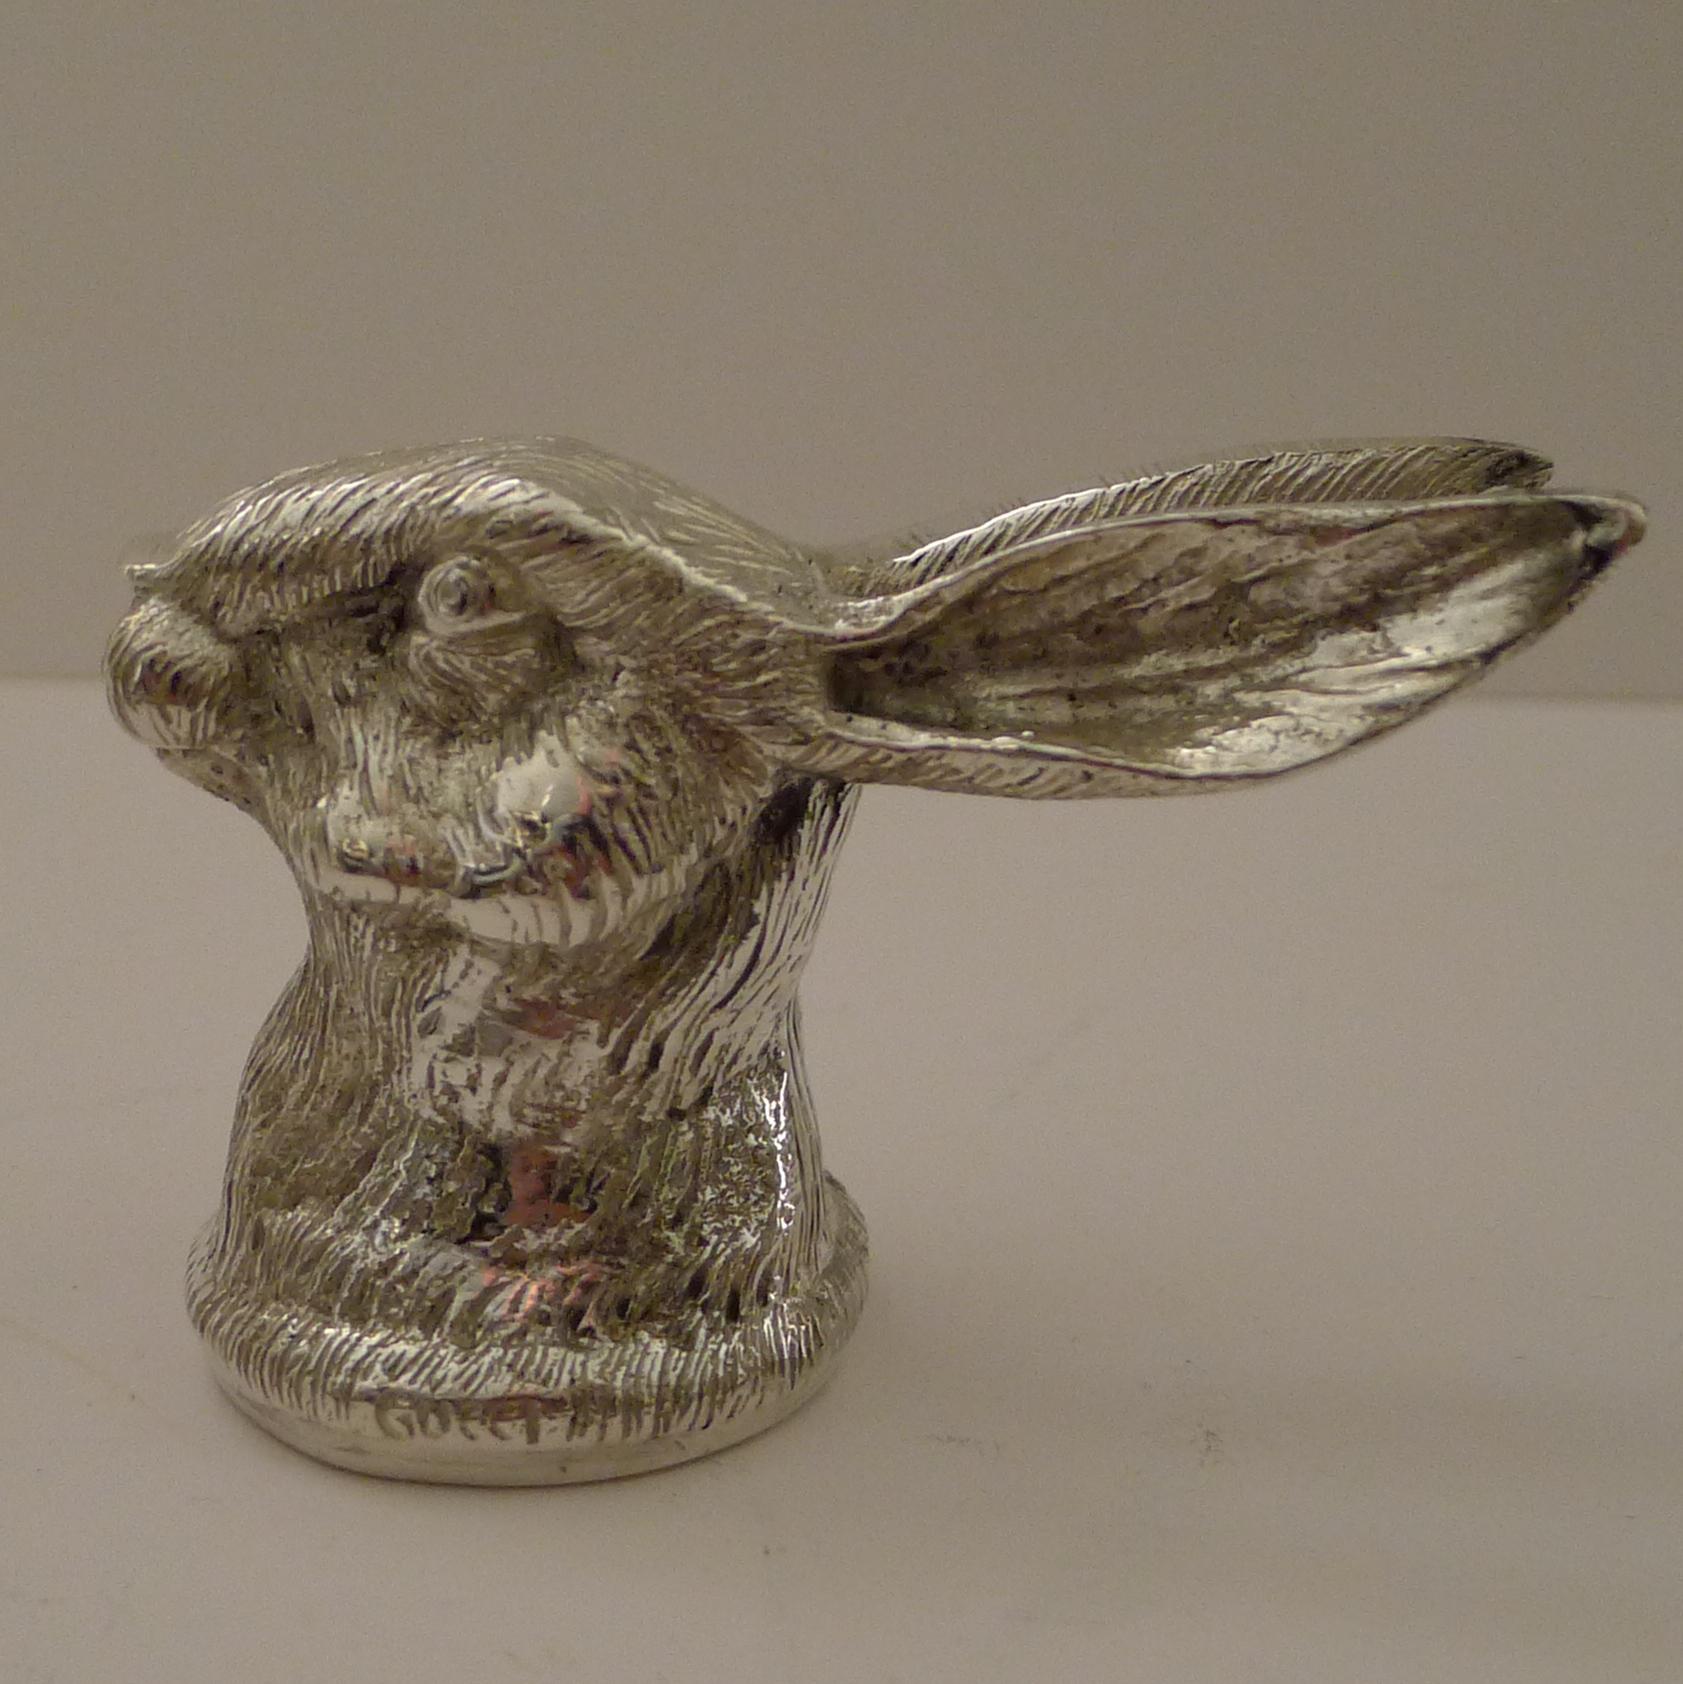 A fabulous and highly collectable bottle opener by the iconic Italian designer, Gucci.

Made from silver plate, this example is in the form of a Hare, one of the most desirable examples made by Gucci.

Dating to the 1970's it remains in superb